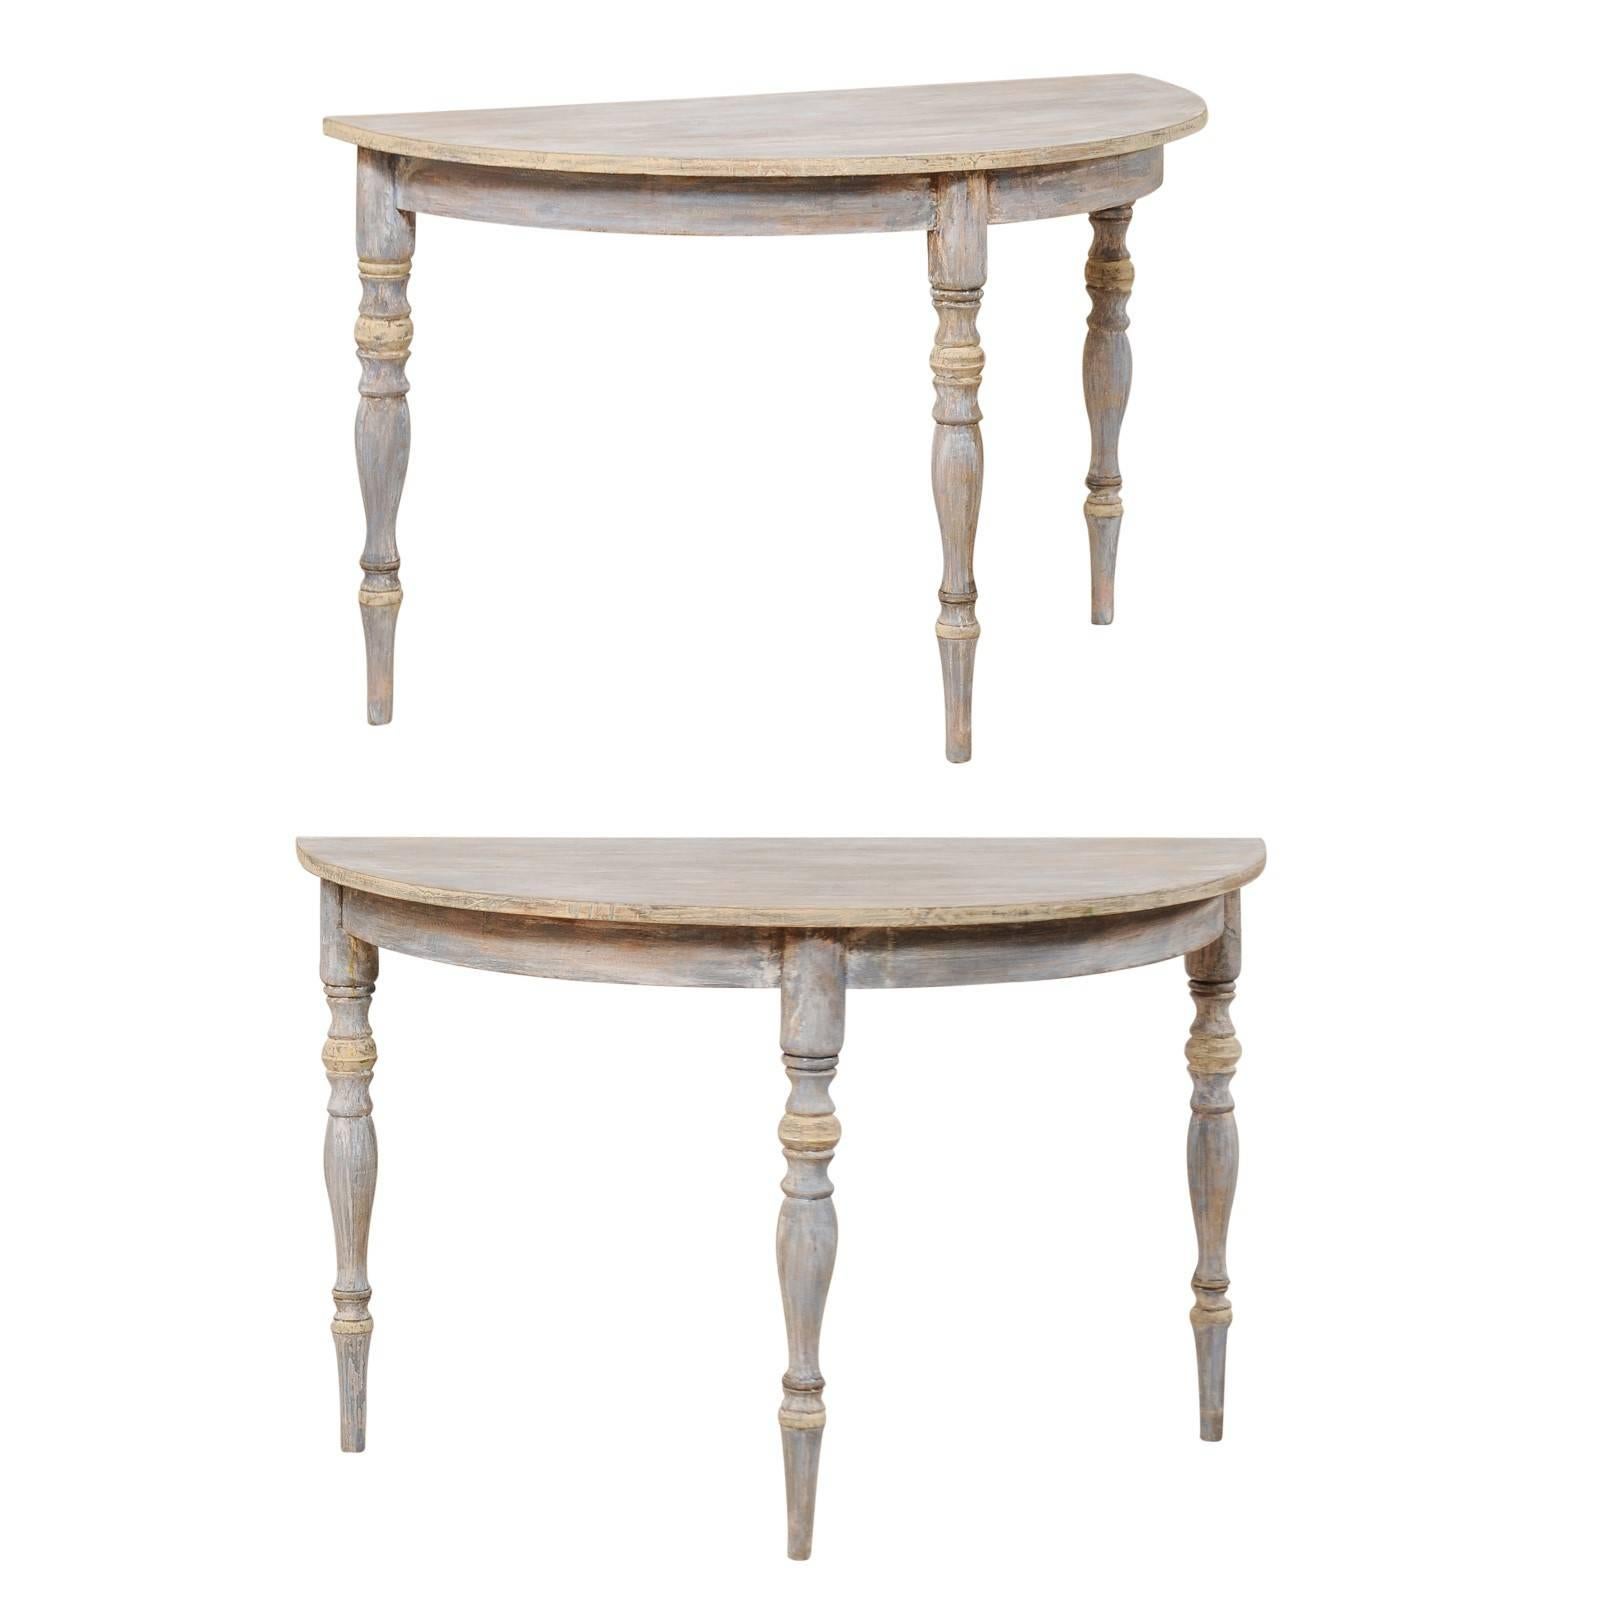 Pair of 19th Century Swedish Demilune Tables of Soft Blue, Grey and Cream